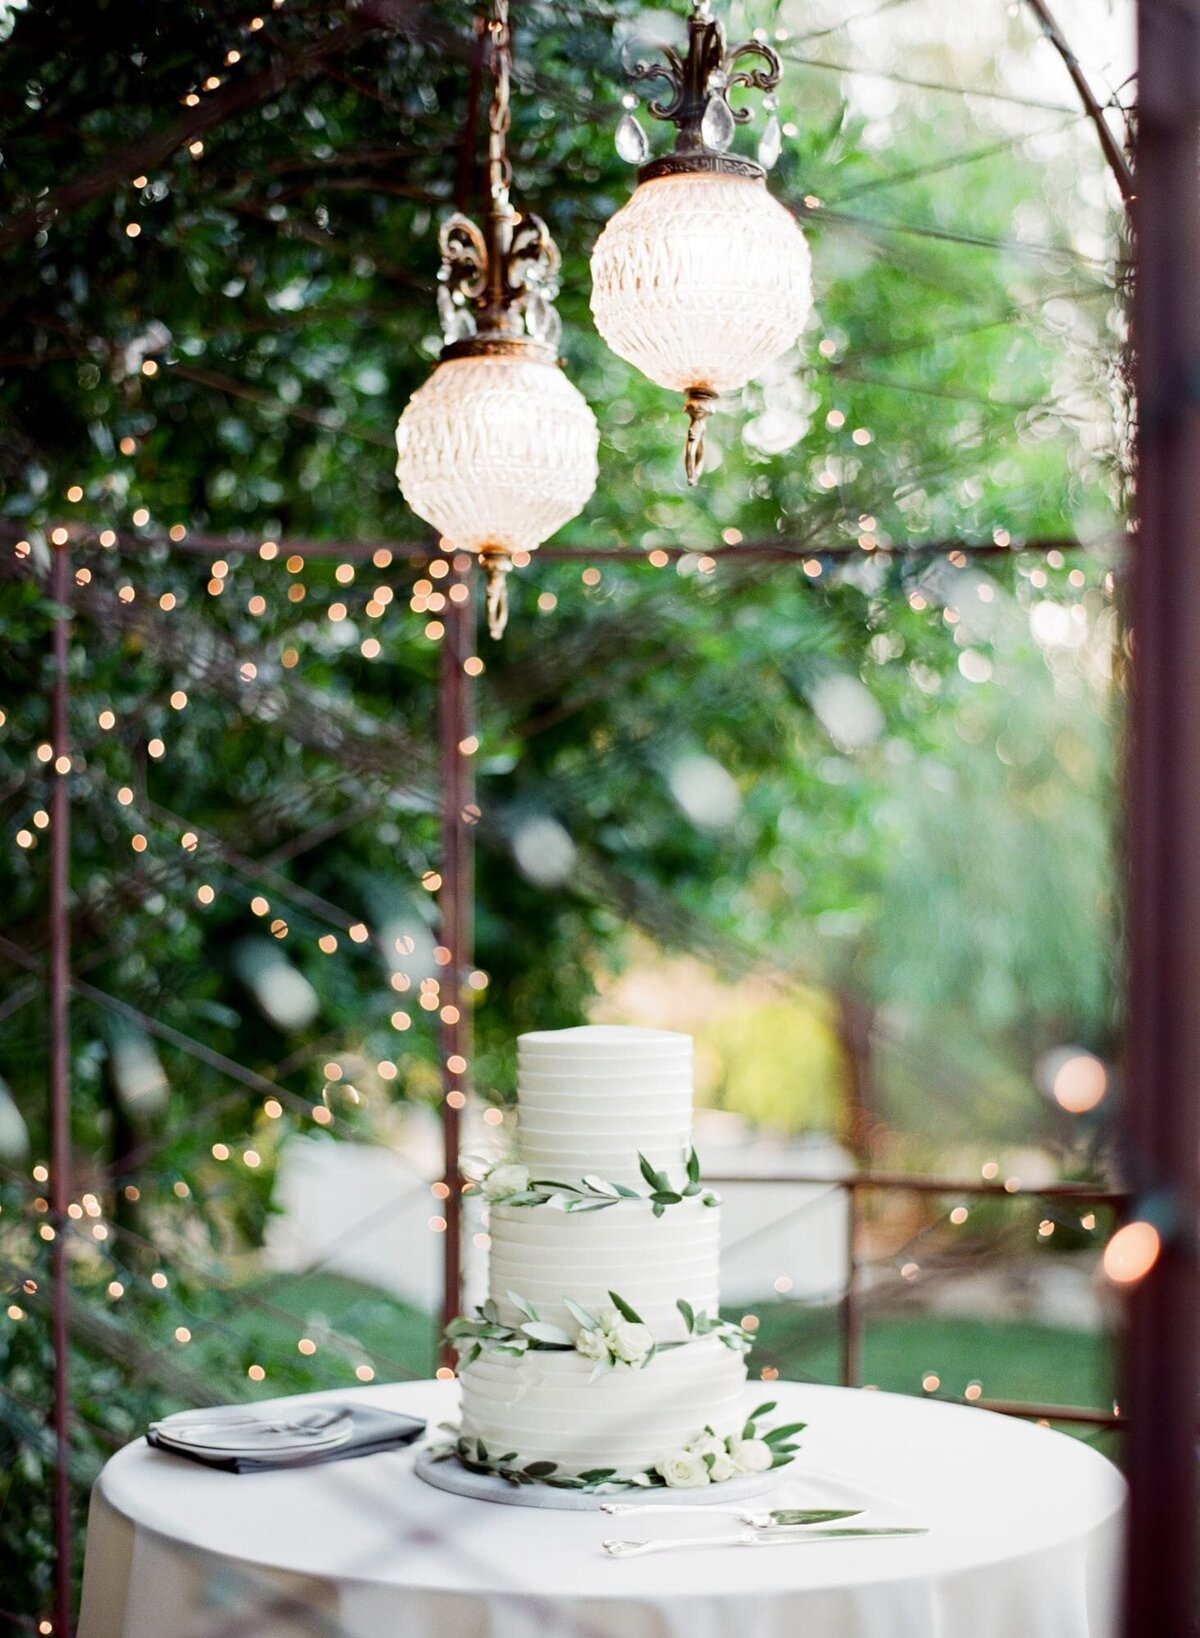 natural outdoor wedding-themed wedding cake decorated on a tabletop.